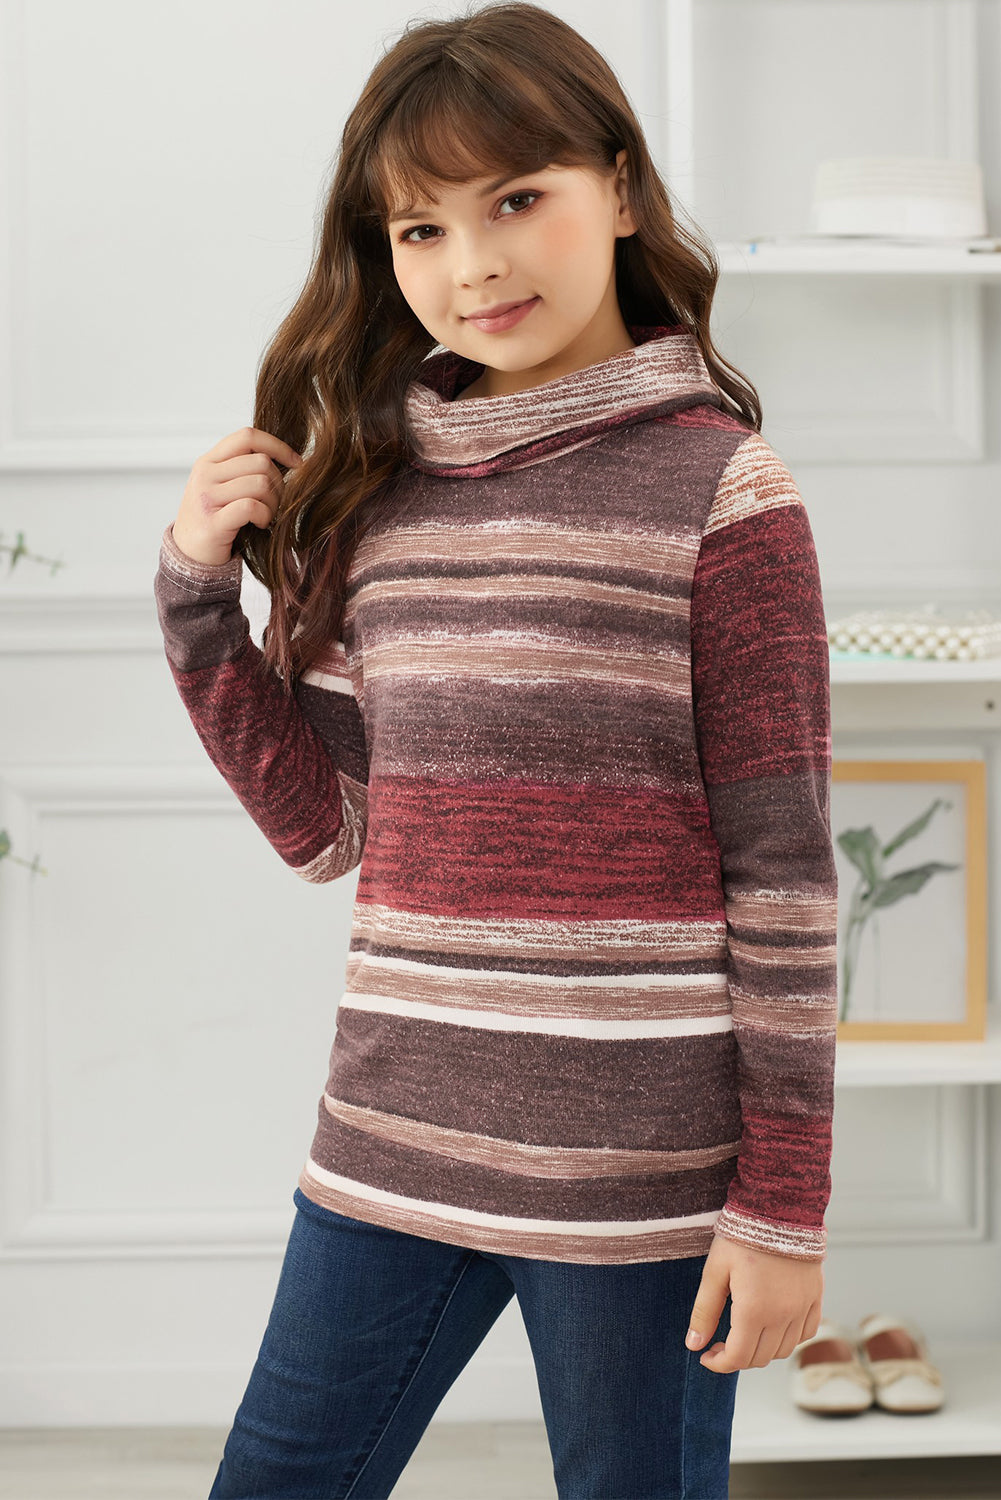 Children’s Girls Striped Cowl Neck Top with Pockets